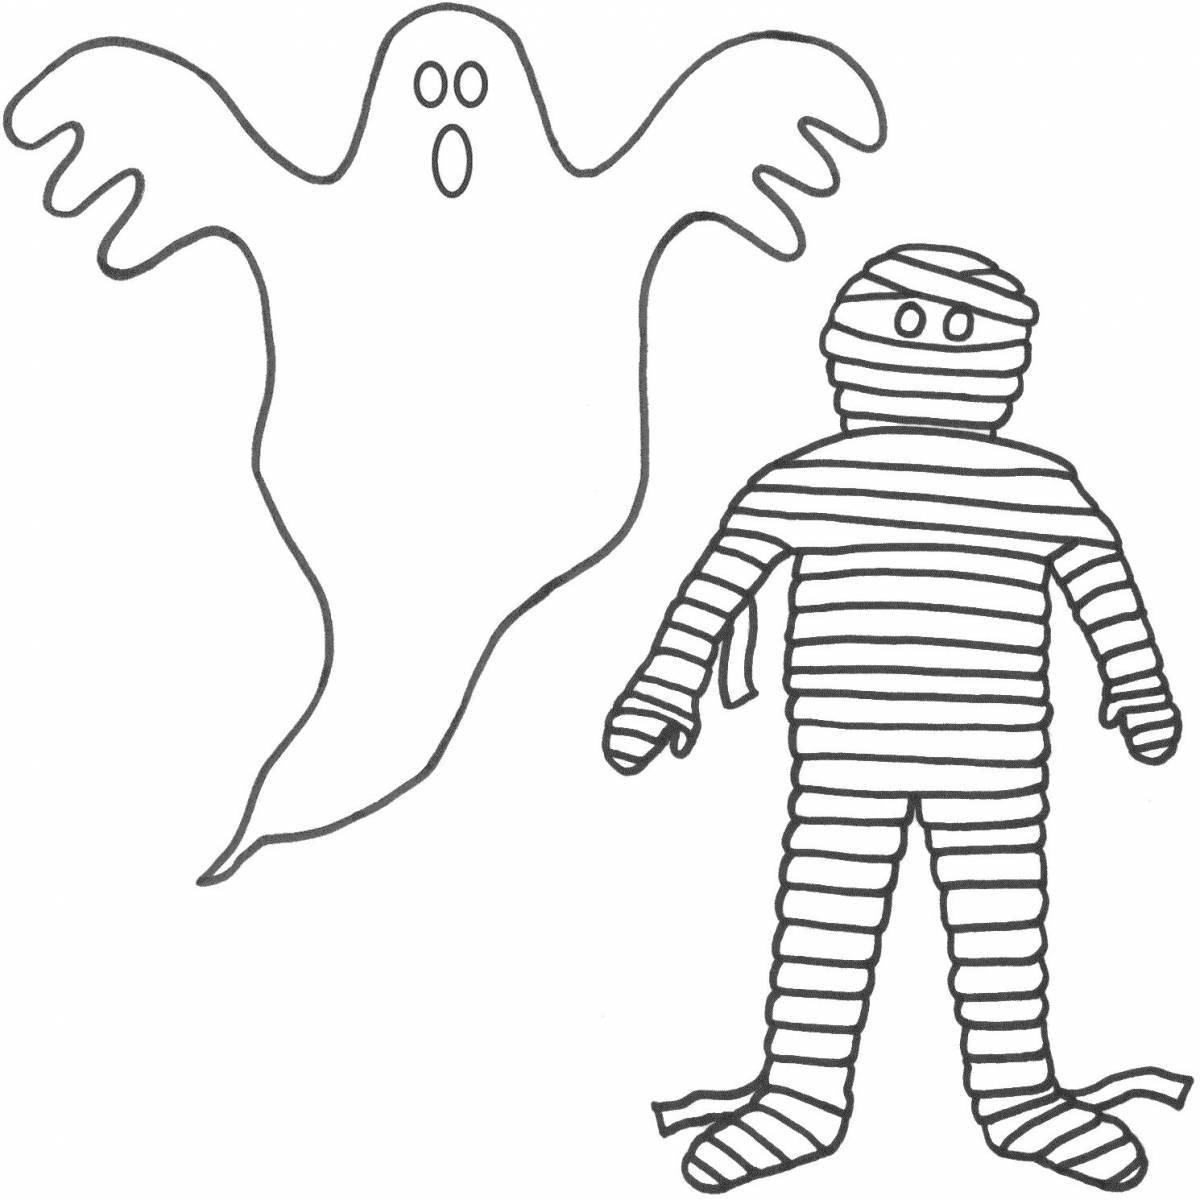 Strange ghost coloring book for kids